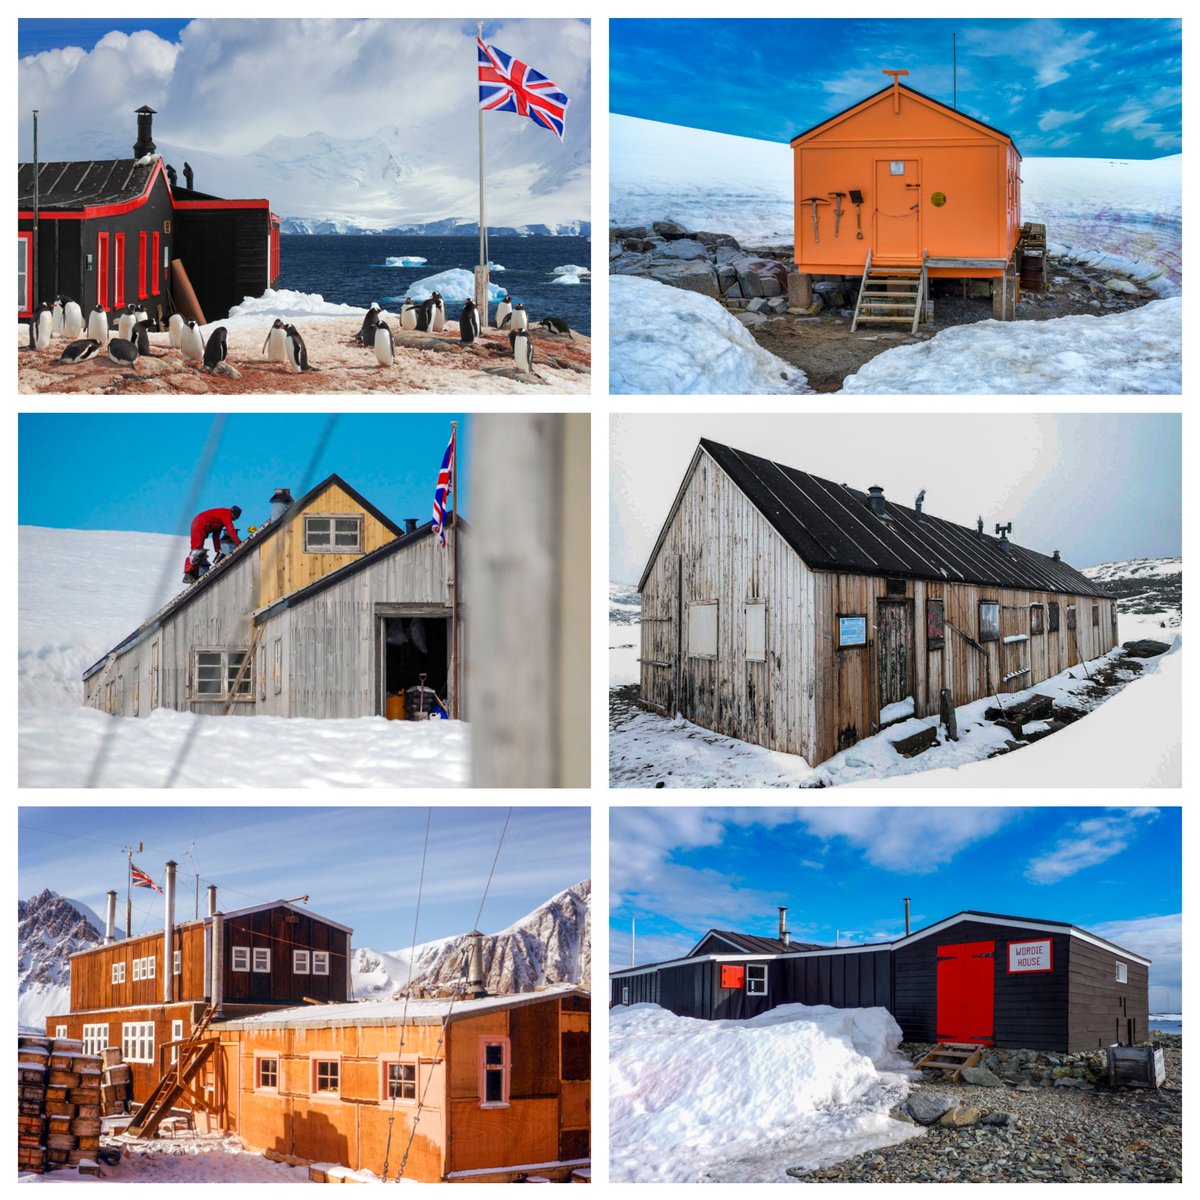 Happy International Day of Monuments and Sites! In 1993, we didn’t have a single site to our name. Today, we manage the restoration and care of six heritage huts and their treasures in Antarctica! #IntlDayforMonumentsandSites #ICOMOS 📸 All images: UKAHT/BAS Archives